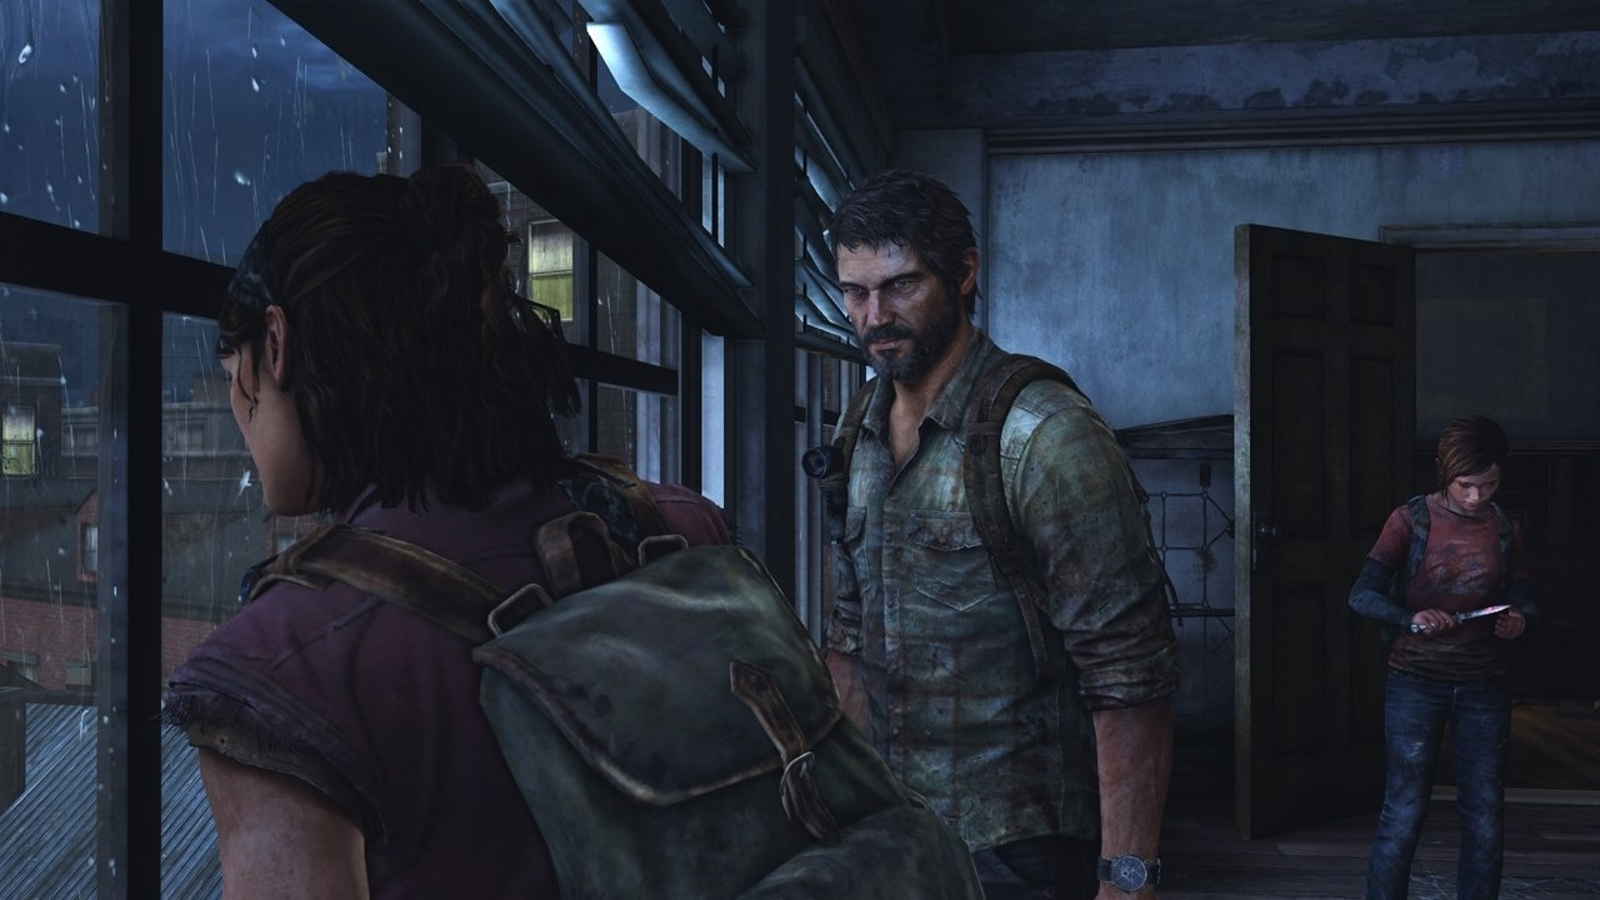 The Last of Us Part II Remastered is in the Works According to a Naughty  Dog Employee